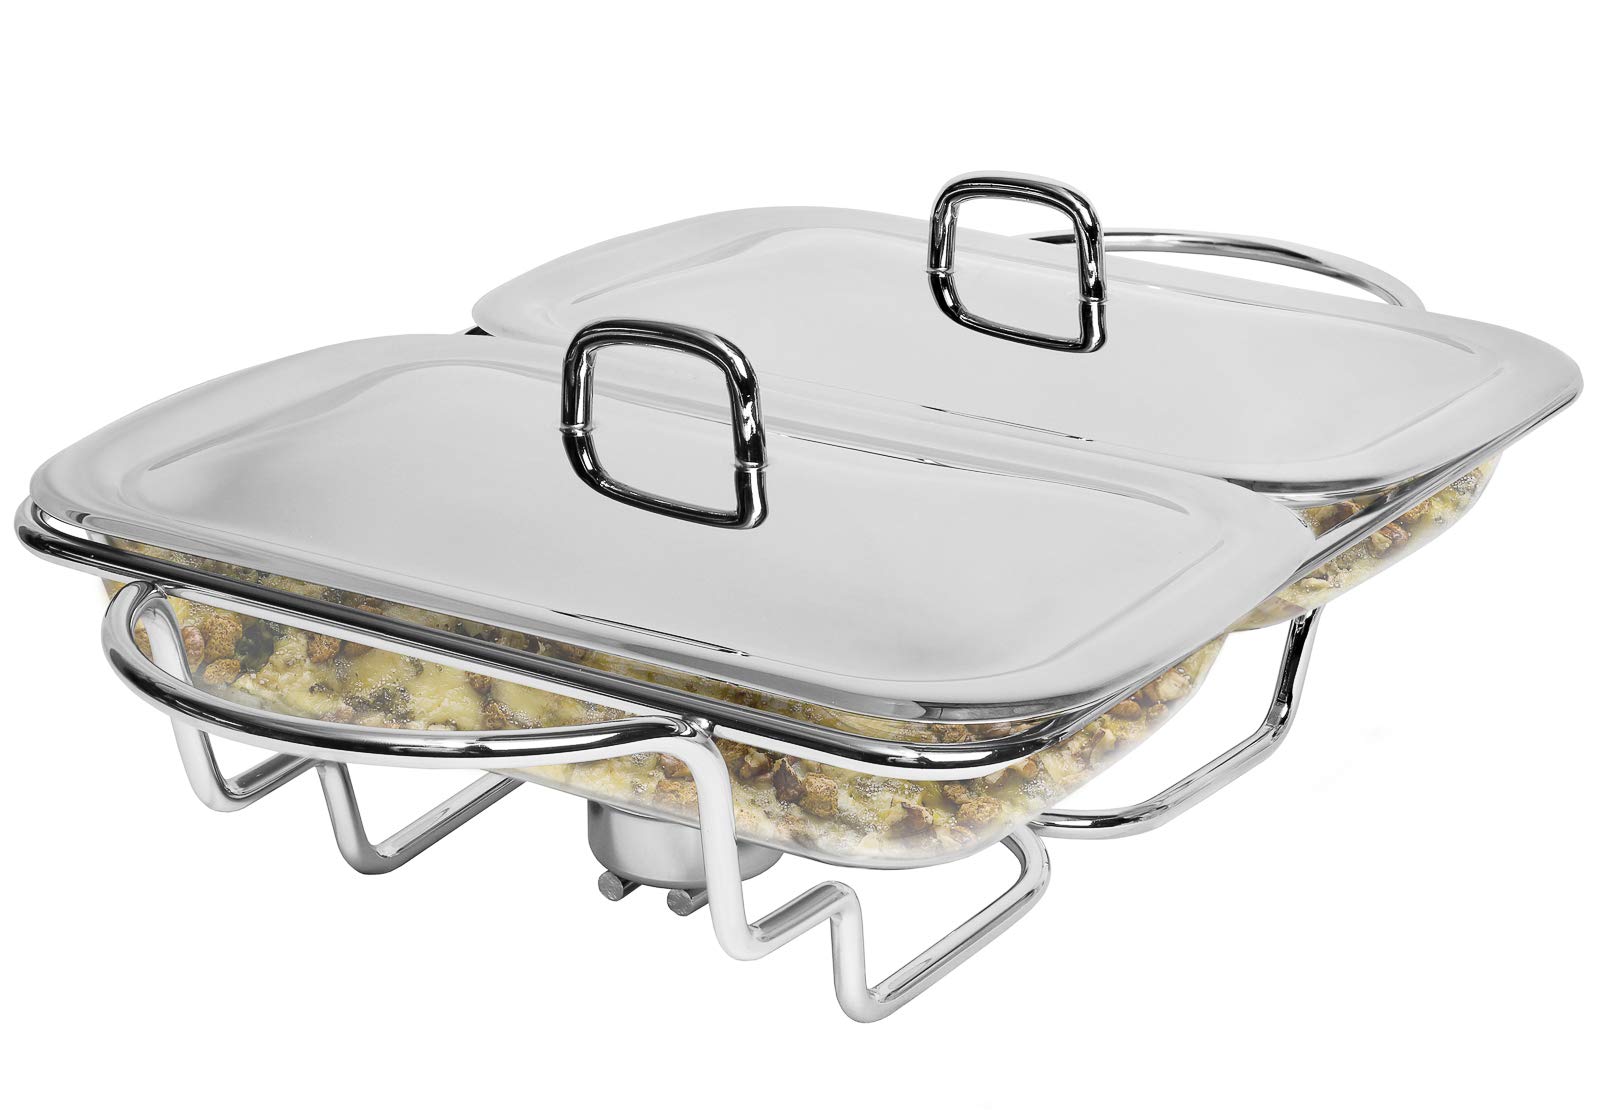 Galashield Chafing Dish Buffet Set Warming Tray with Lids Stainless Steel with 2 Oven Safe Glass Dishes Buffet Servers (1.5-Quart Each Tray)